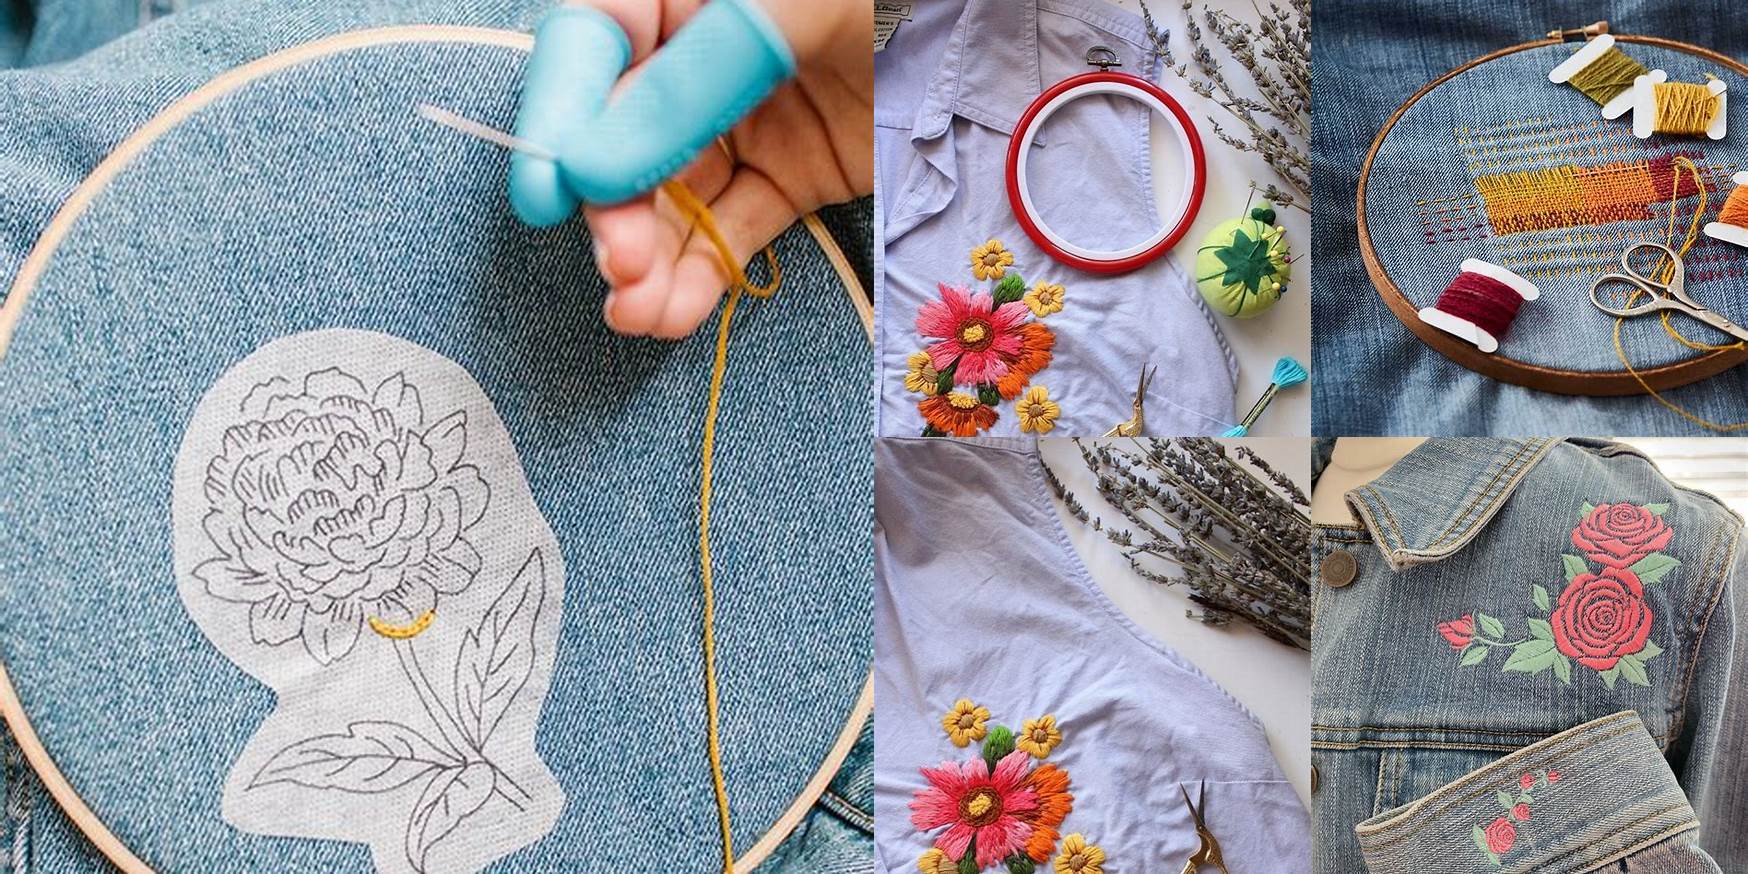 How To Finish Embroidery On Clothes